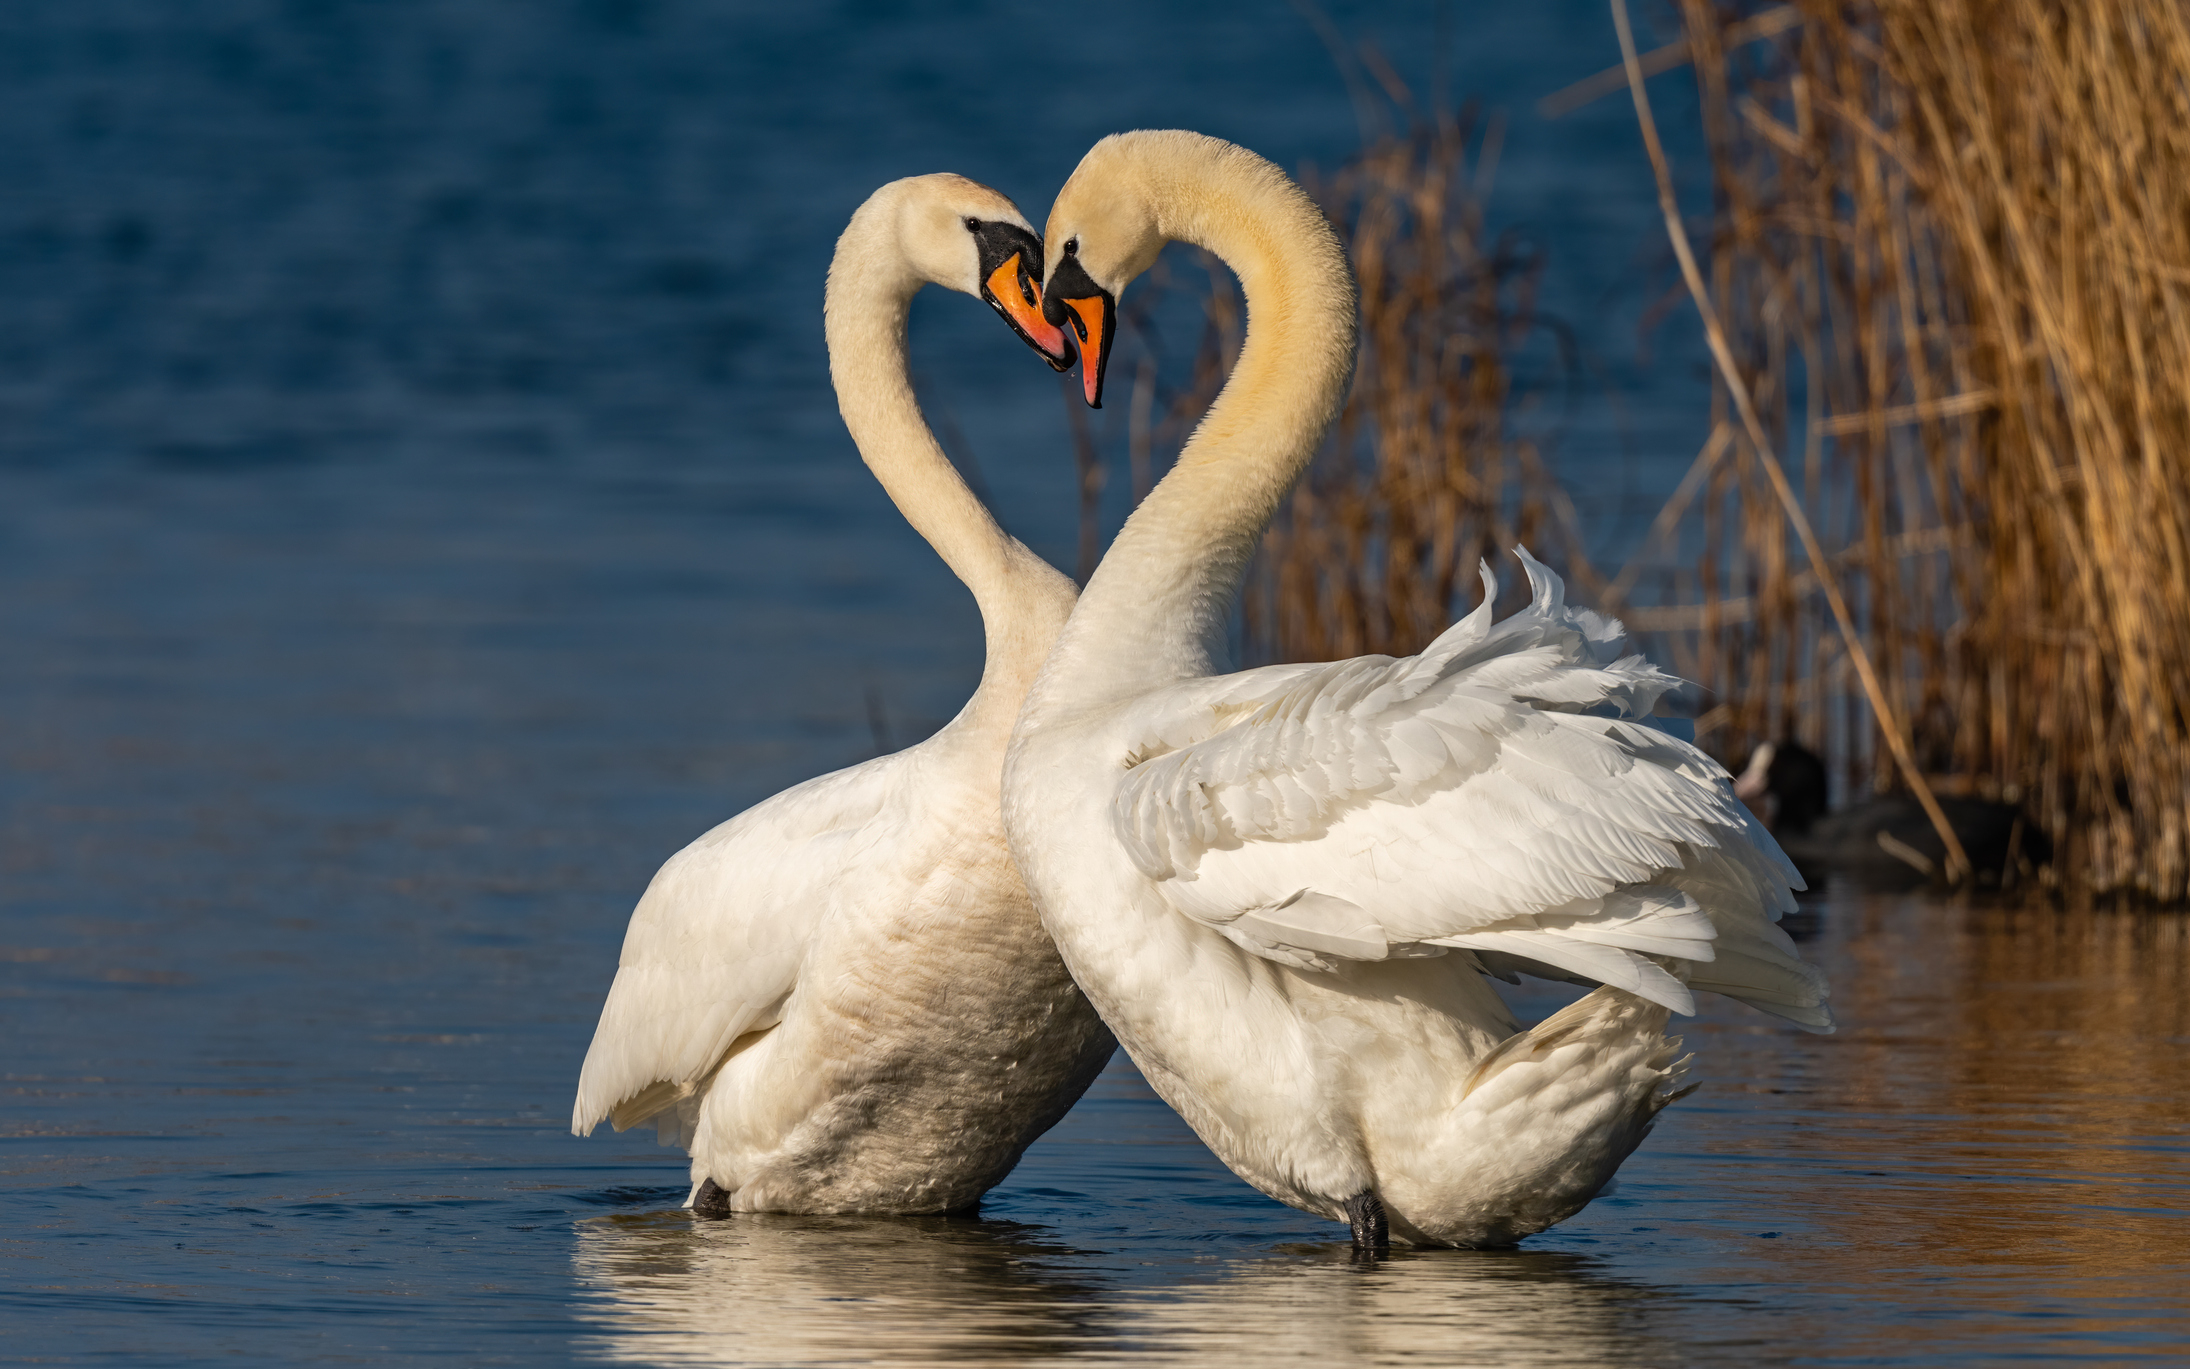 Two swans forming a heart shape with their necks on water